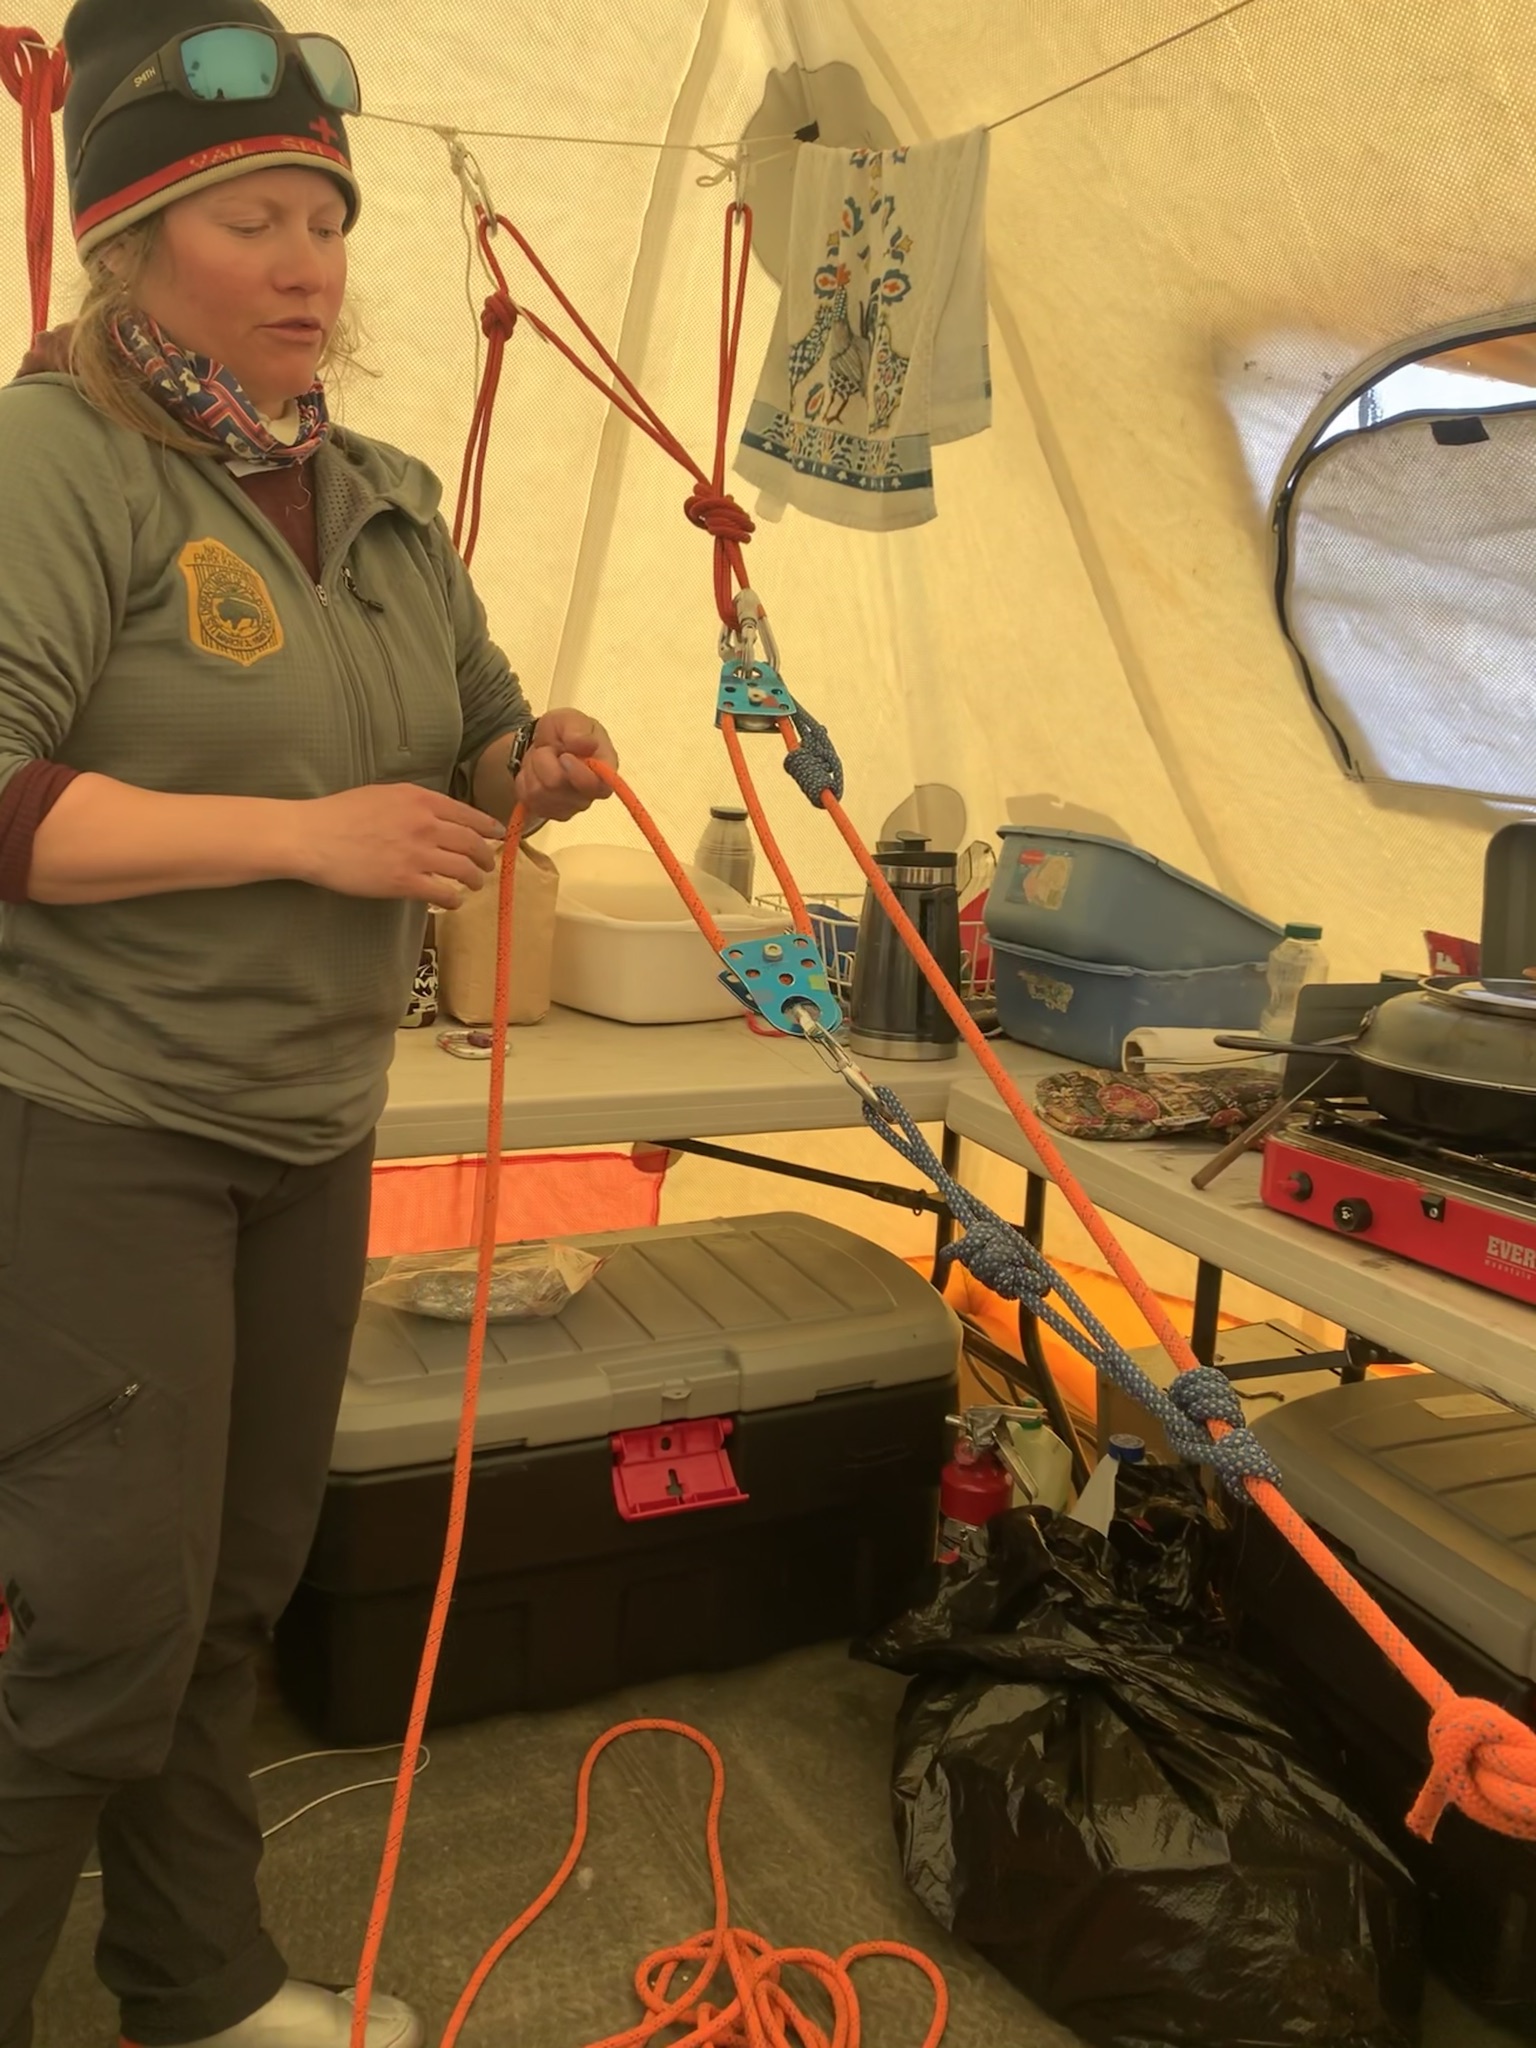 A ranger practices rope rigging in a cook tent